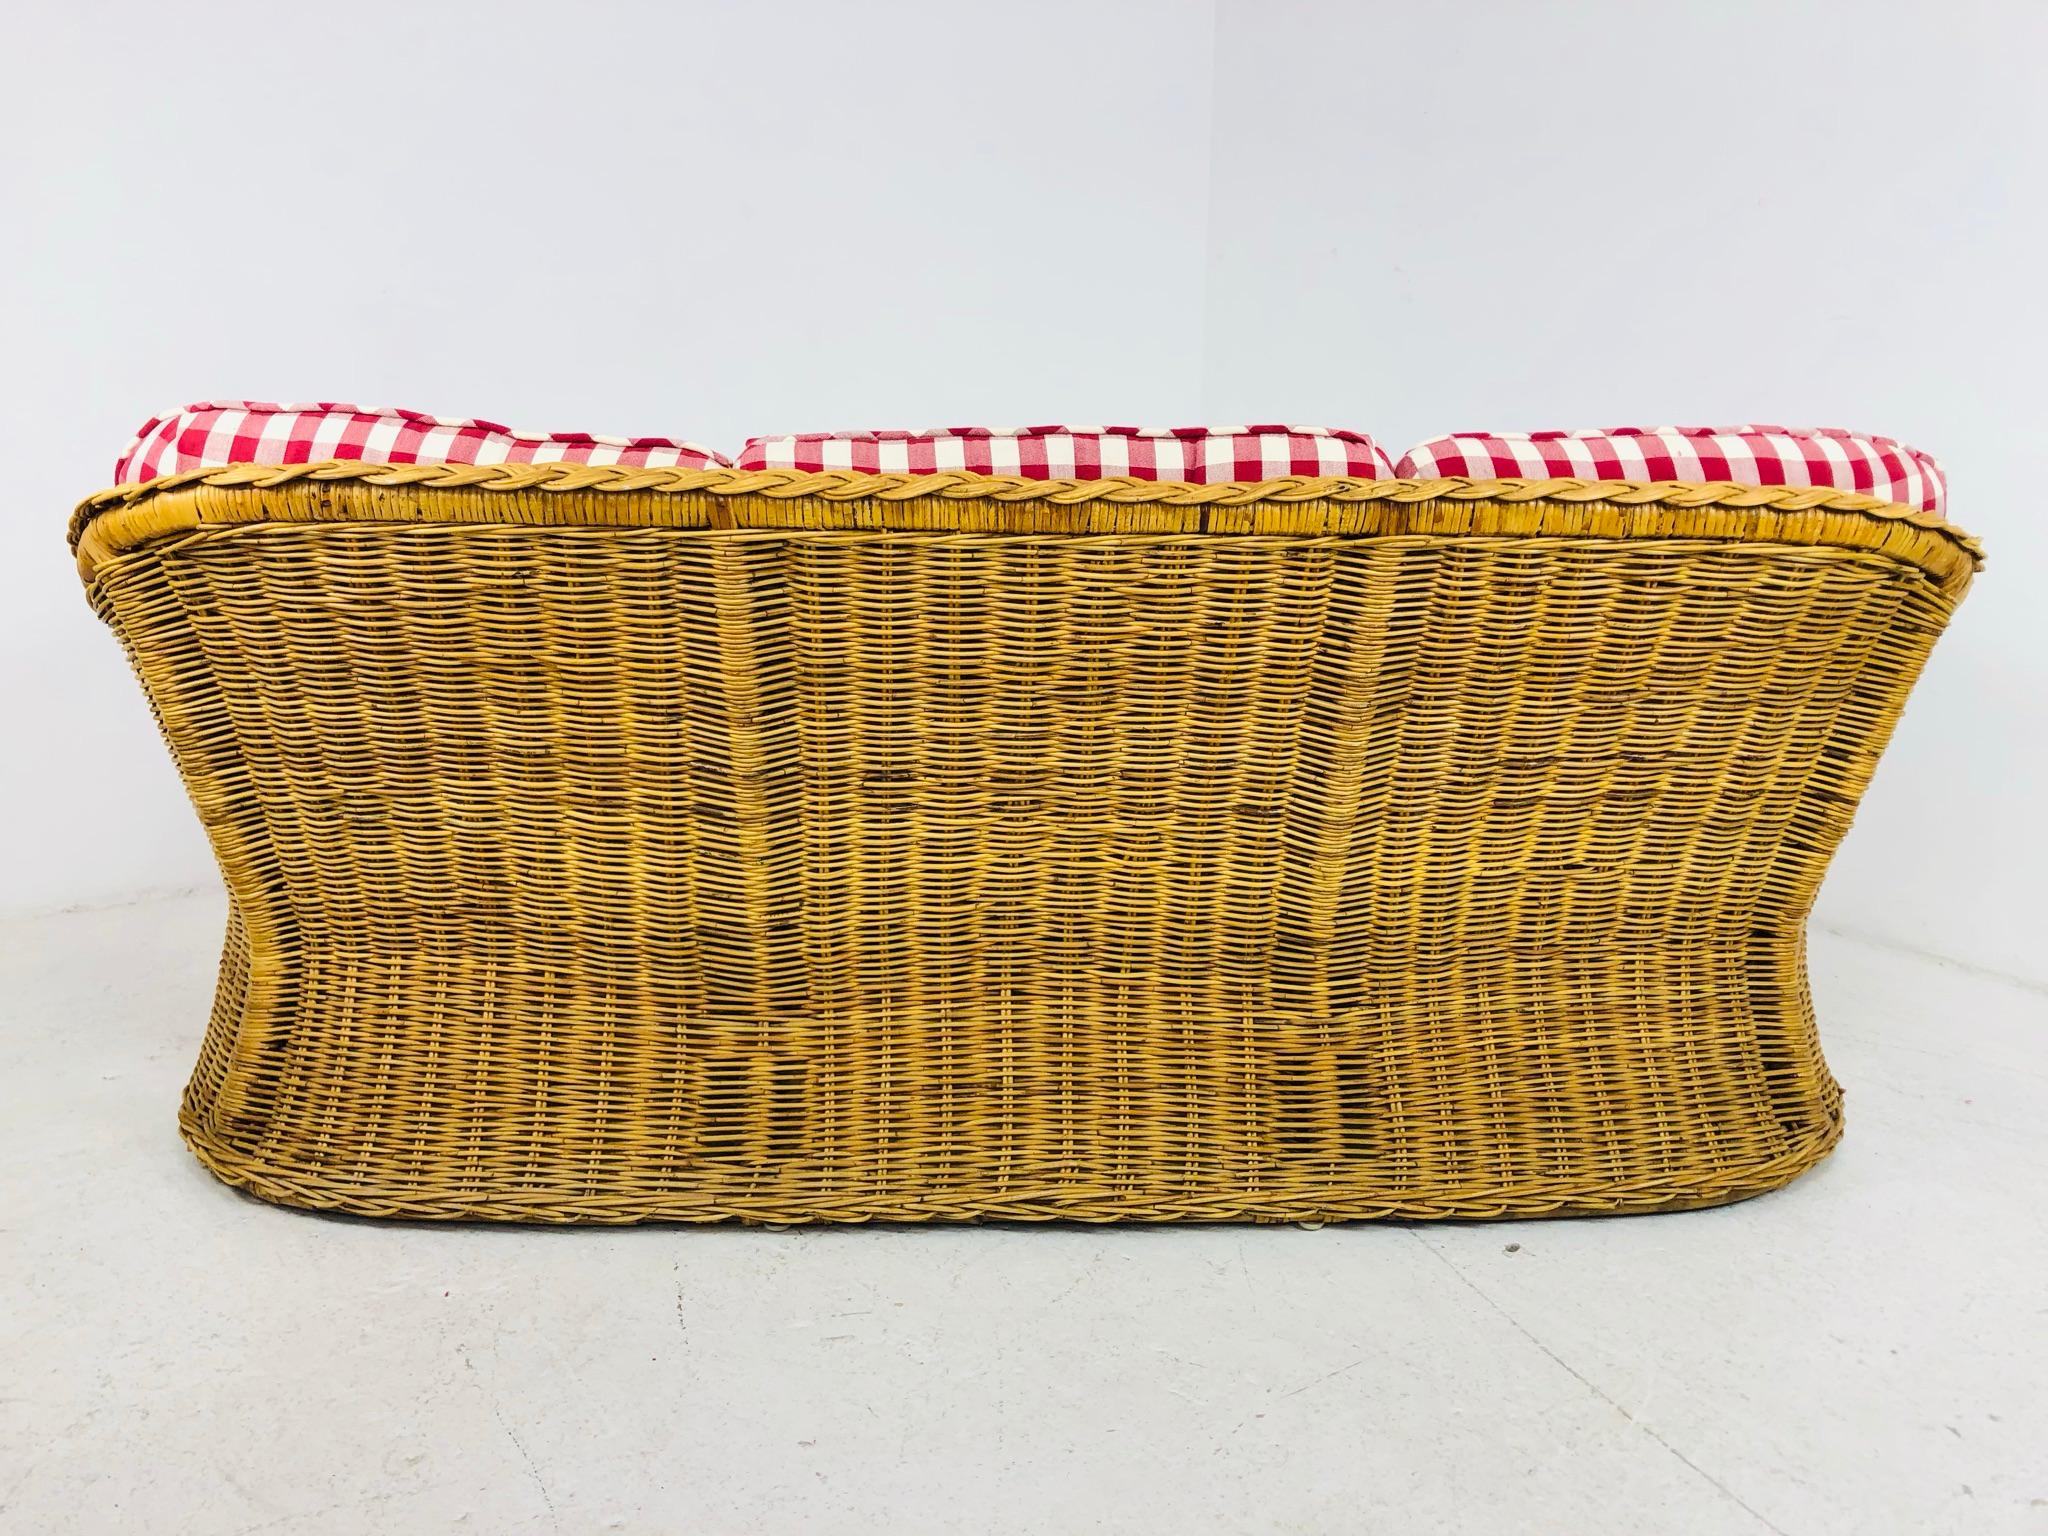 Late 20th Century Braided Rattan Sofa by Wicker Works